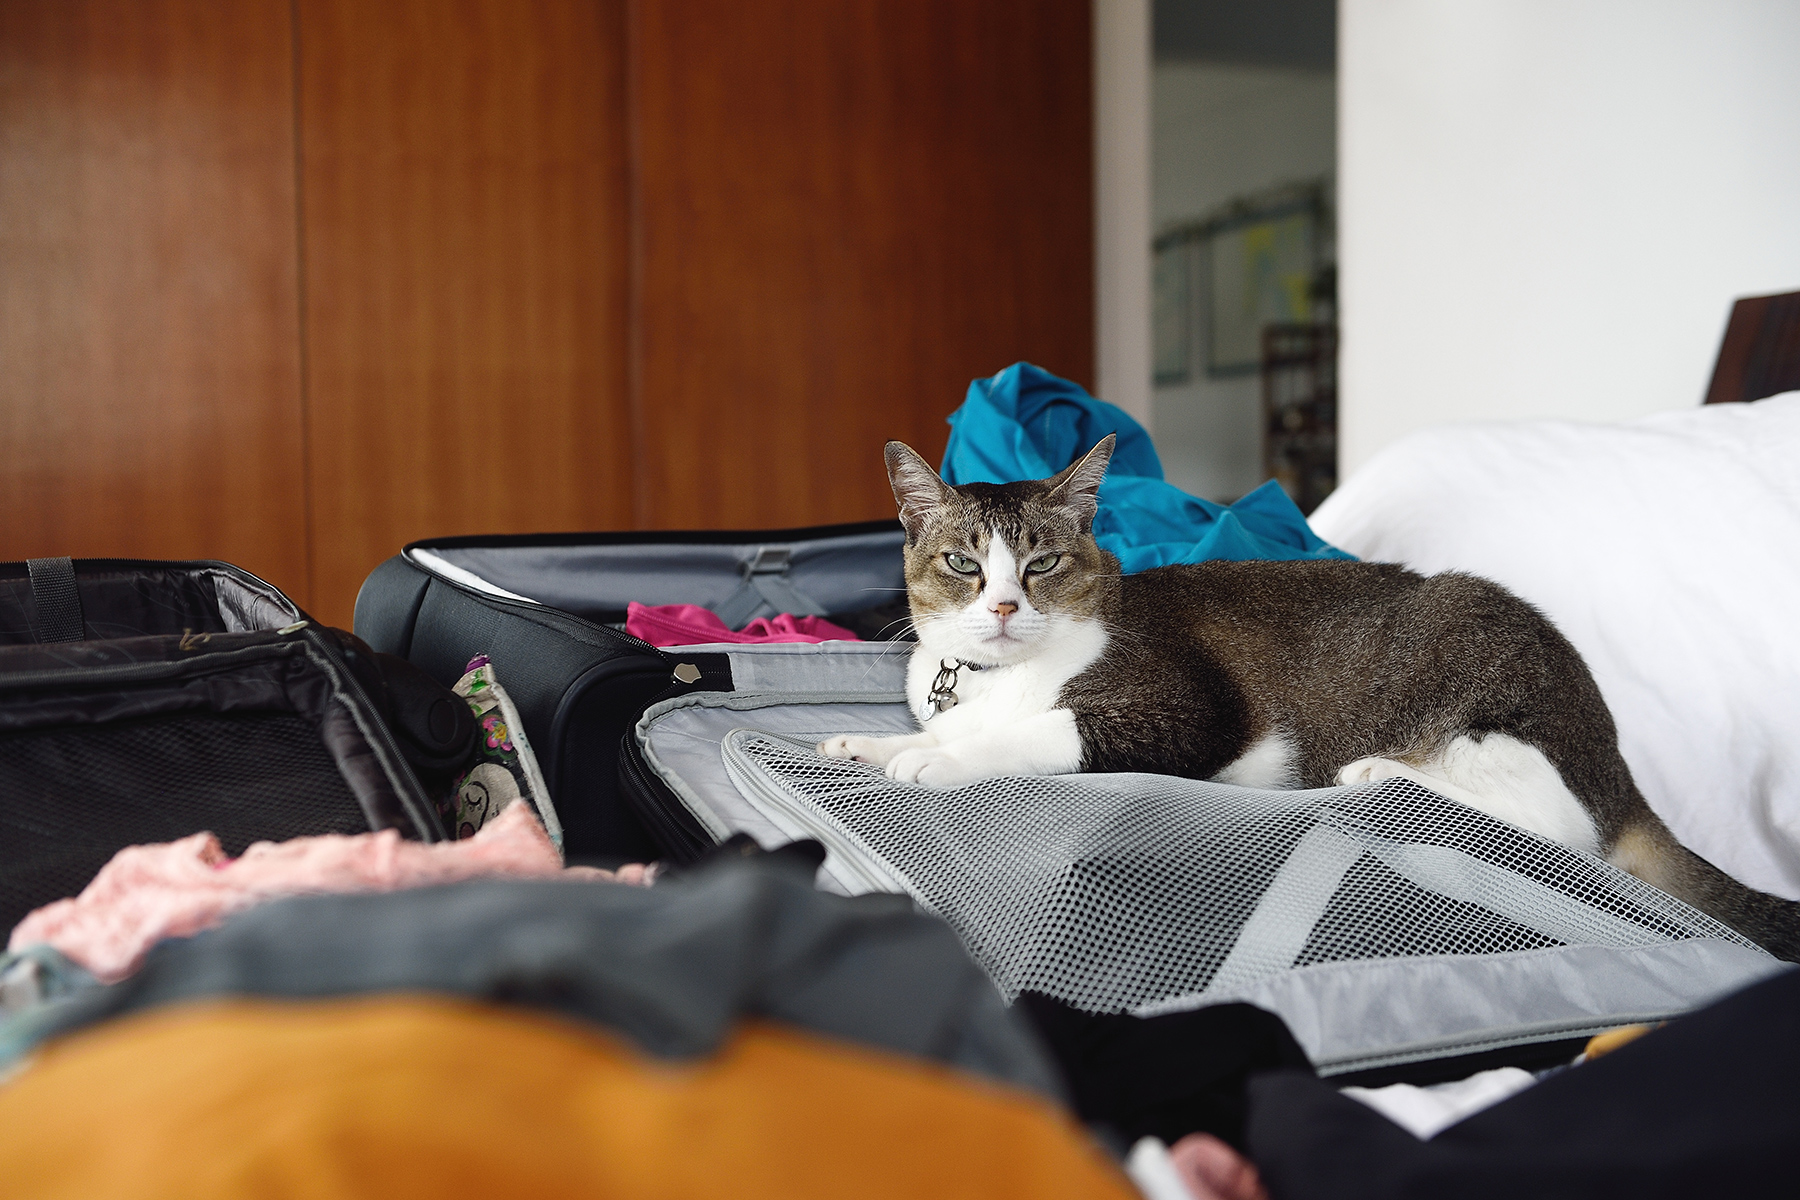 A cat sitting on one side of an open, packed suitcase